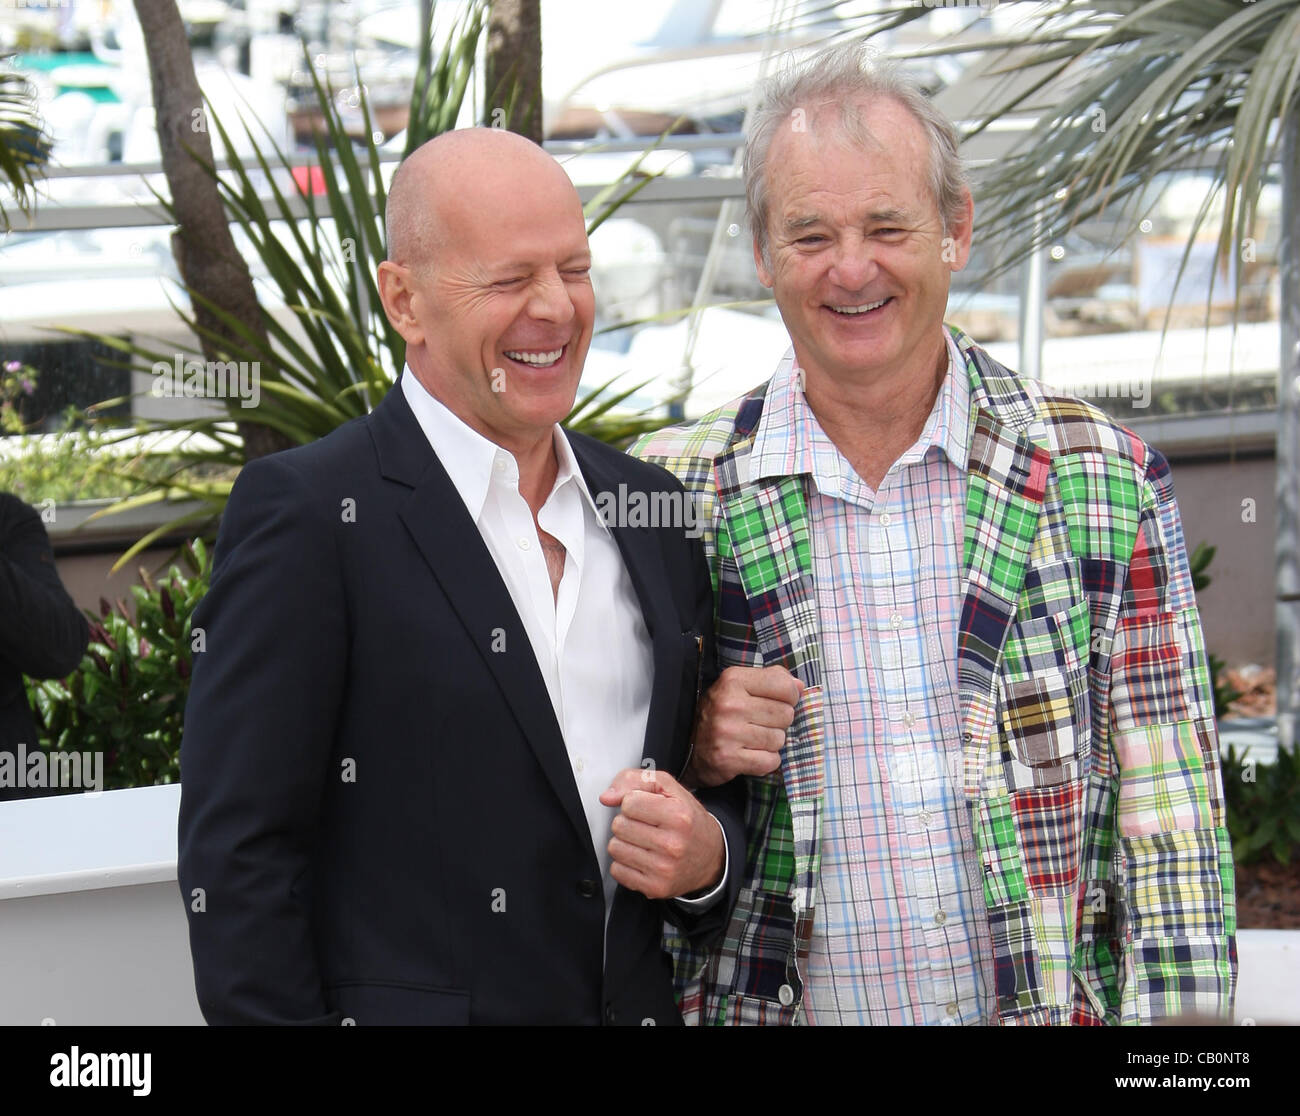 BRUCE WILLIS & BILL MURRAY MOONRISE KINGDOM PHOTOCALL CANNES FILM FESTIVAL 2012 PALAIS DES FESTIVAL CANNES FRANCE 16 May 2012 Stock Photo